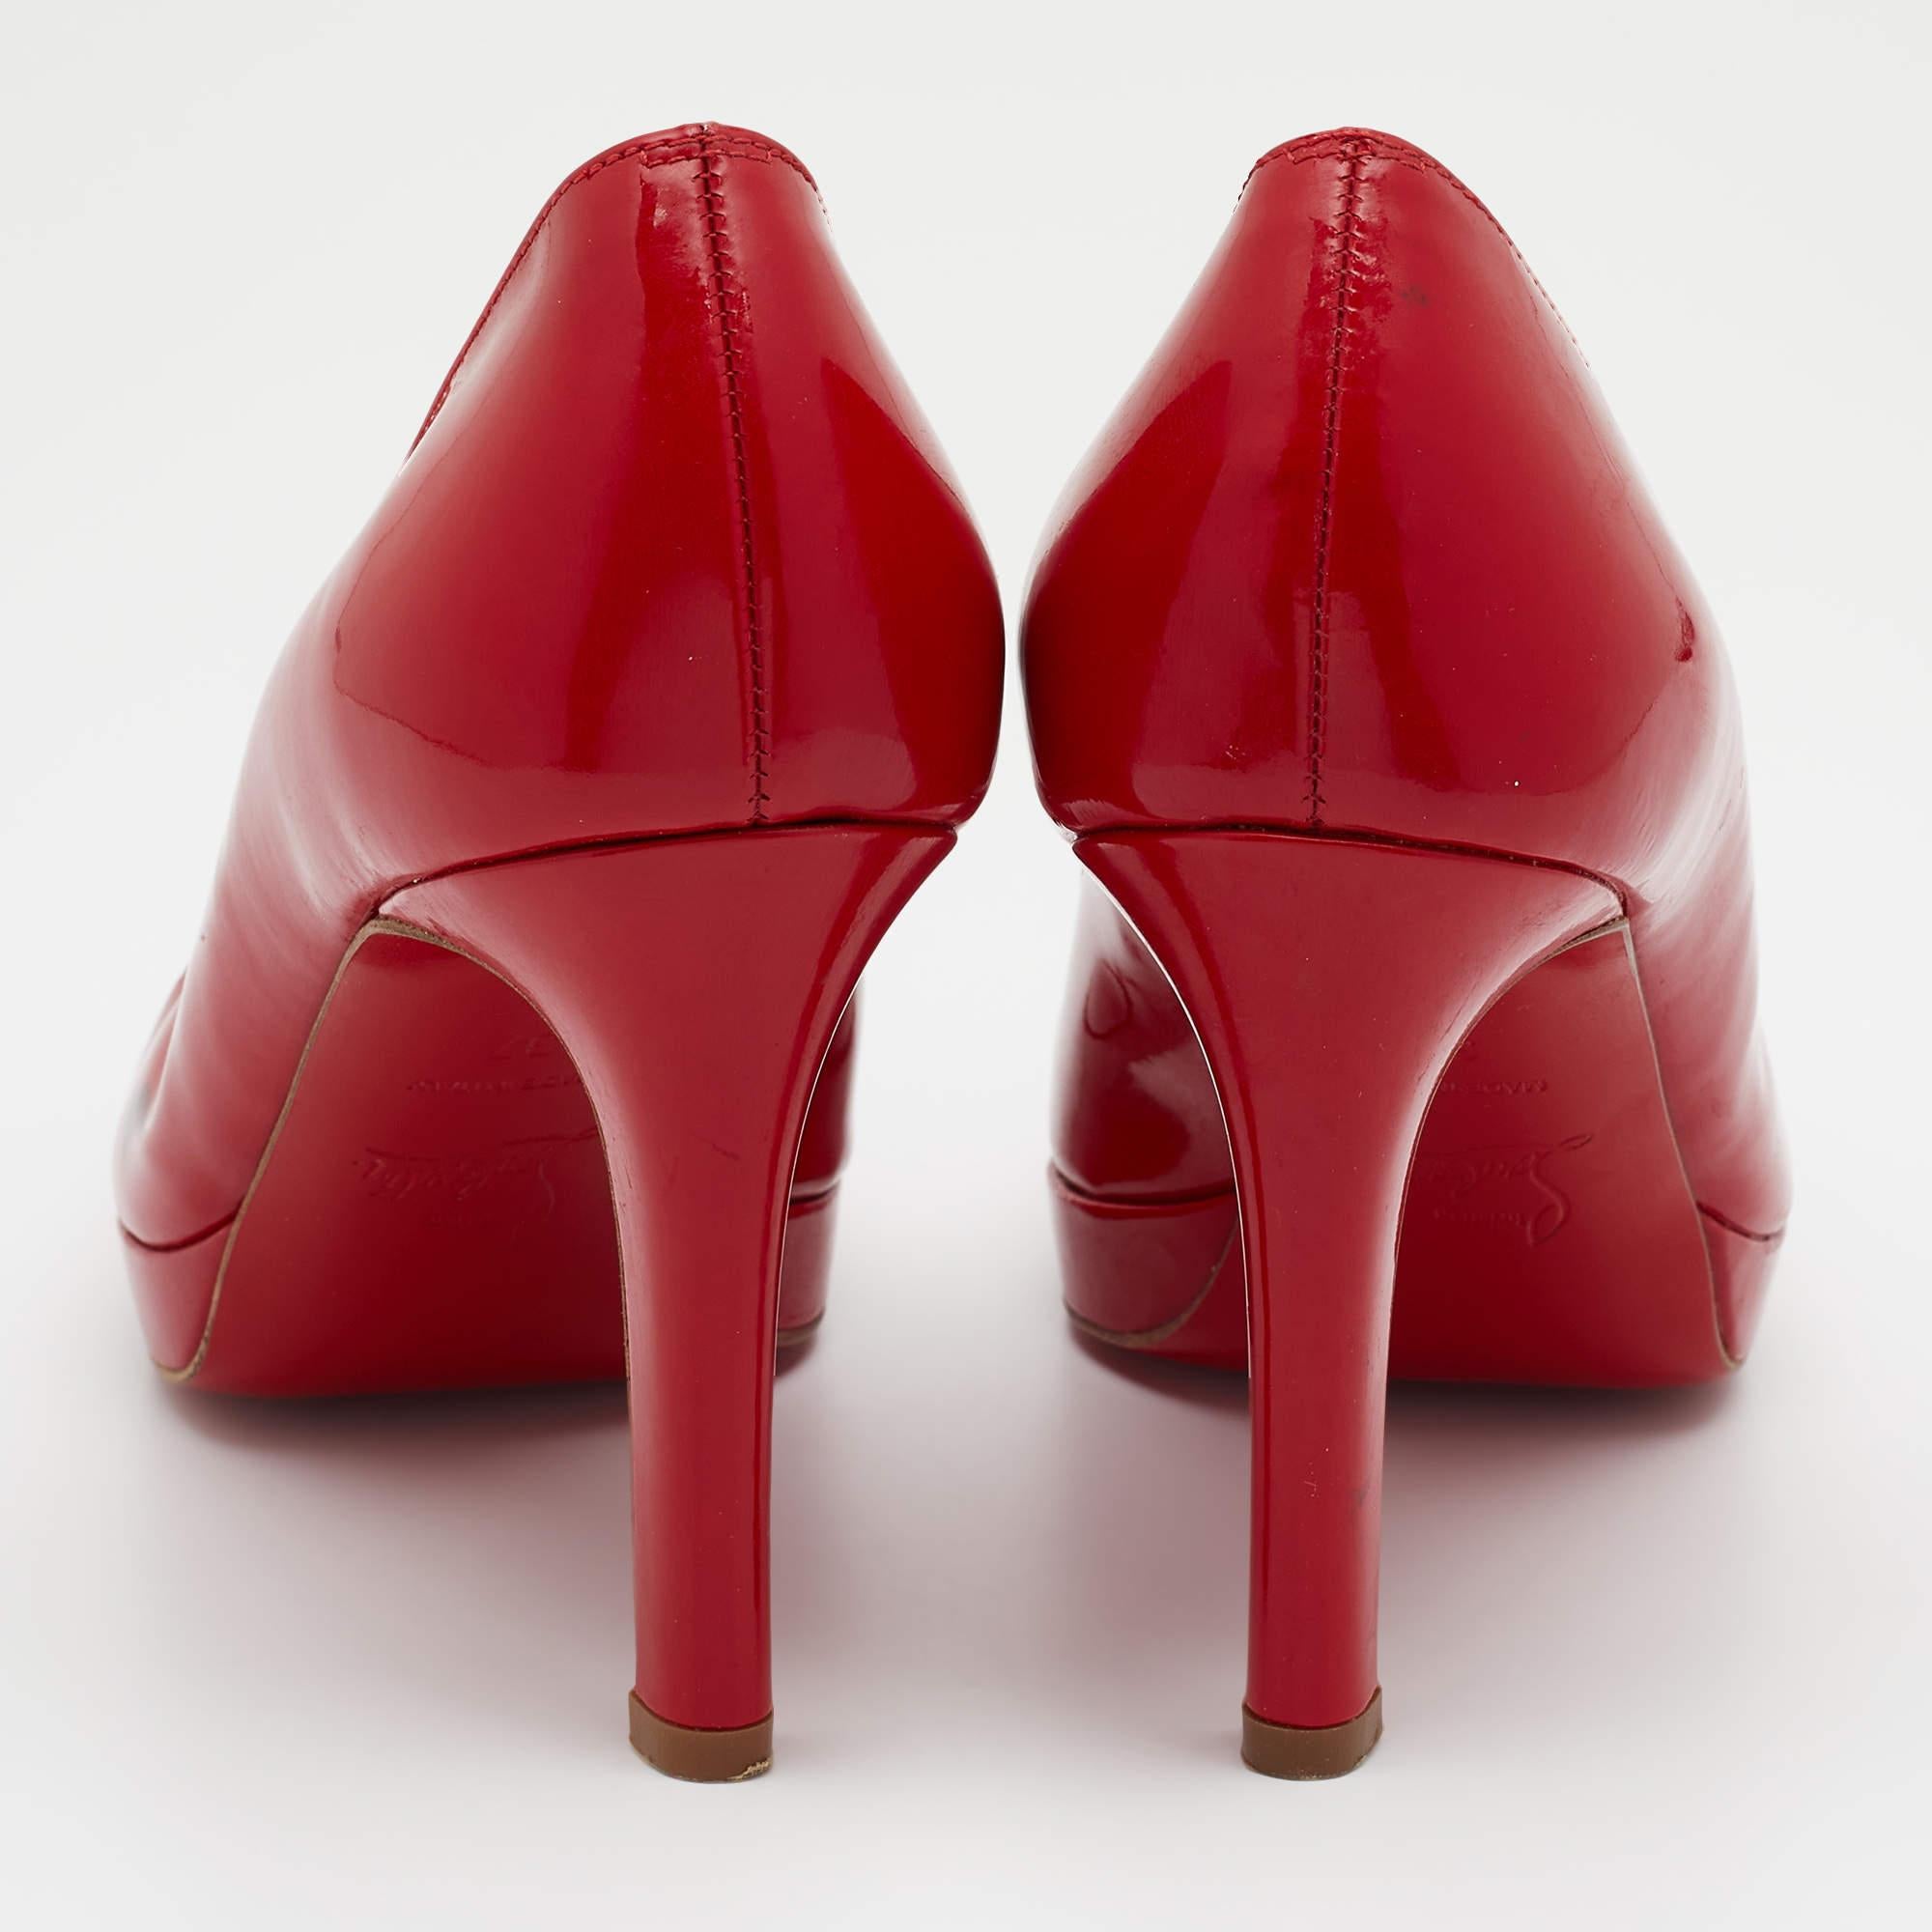 The 9cm heels and platforms of this pair of Christian Louboutin pumps will add a classic update to your ensemble. Created from patent leather, its signature red-lacquered soles mark the heritage of the brand, and it embodies an architectural shape.